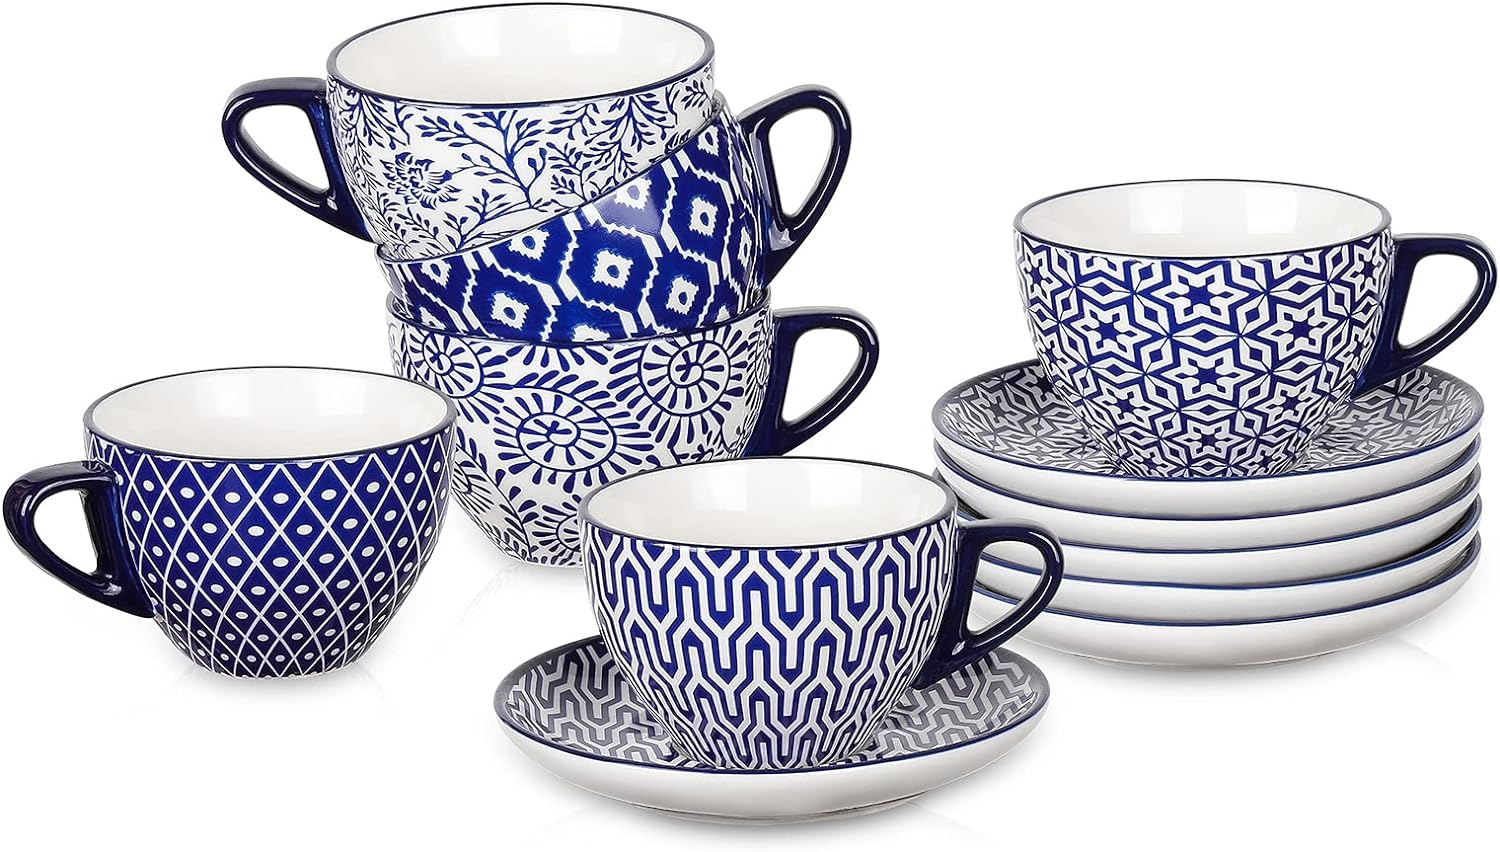 Jusalpha Fine China Coffee Bar Espresso Cups and Saucers Set, 7-Ounce